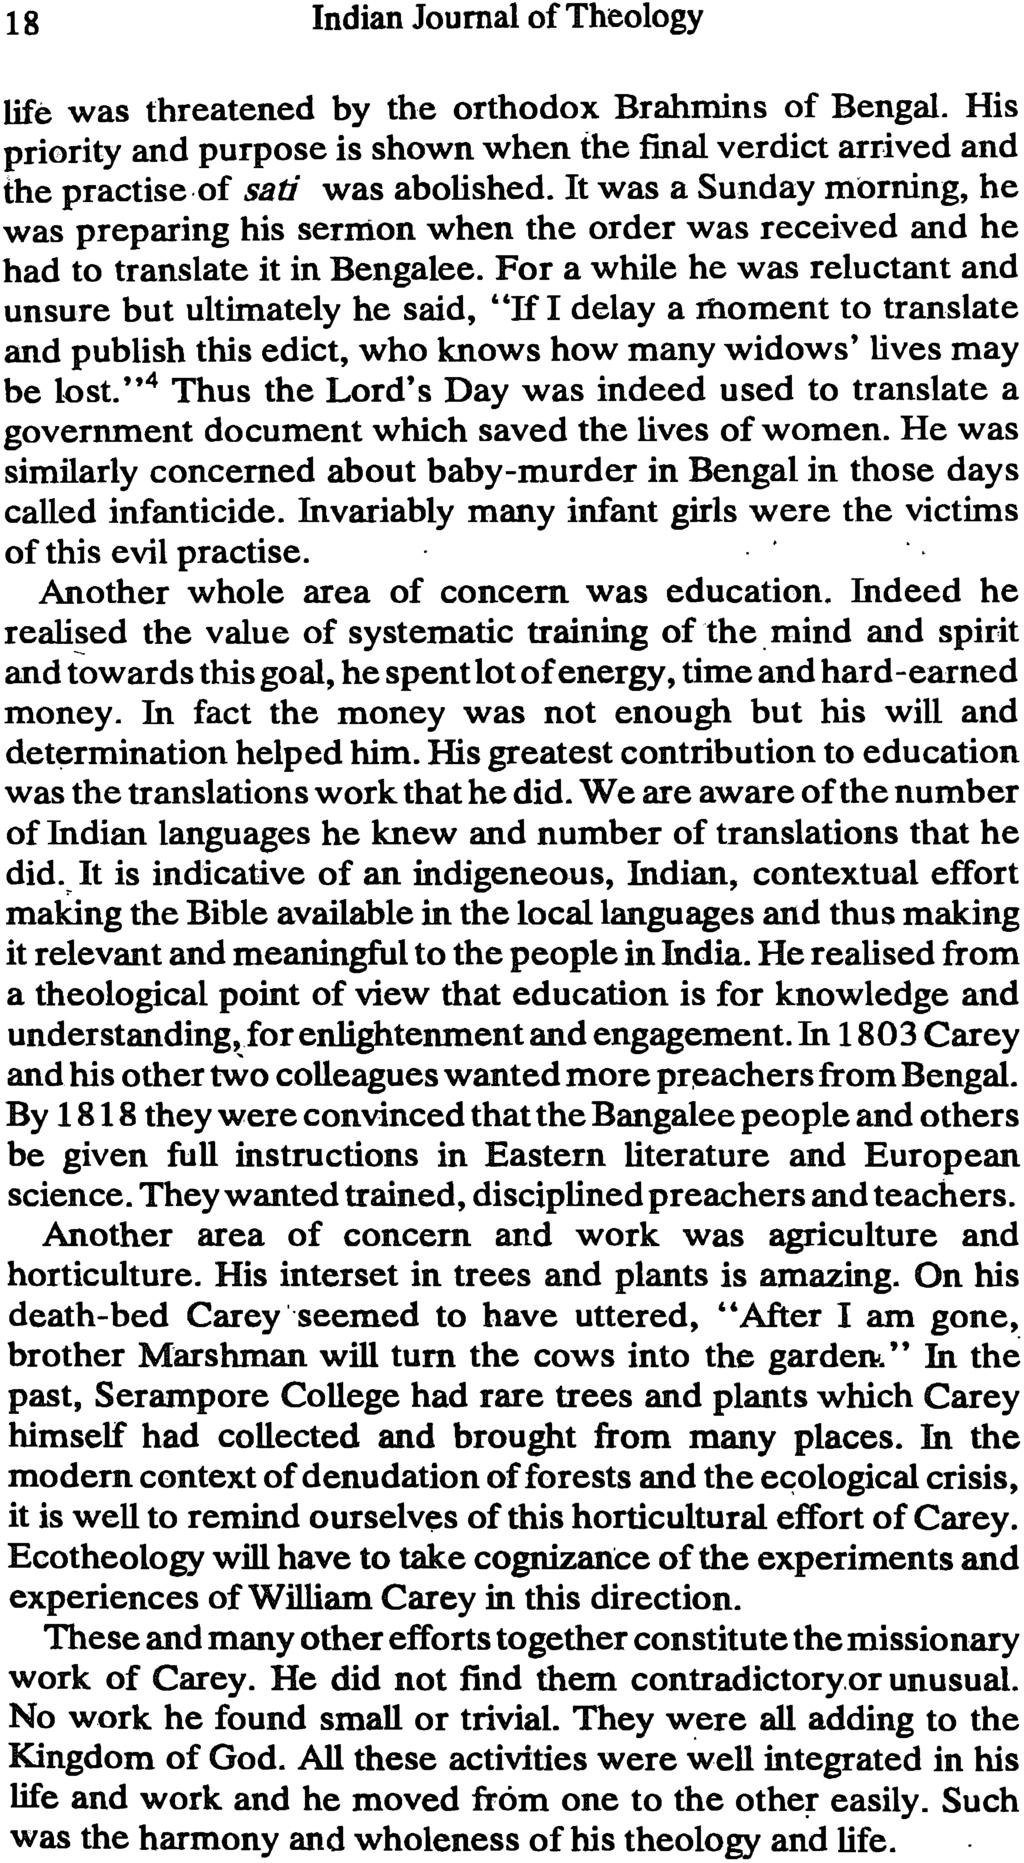 18 Indian Journal of Theology life. was threatened by the orthodox Brahmins of BengaL His priority and purpose is shown when the final verdict arrived and thepractise.of sati was abolished.